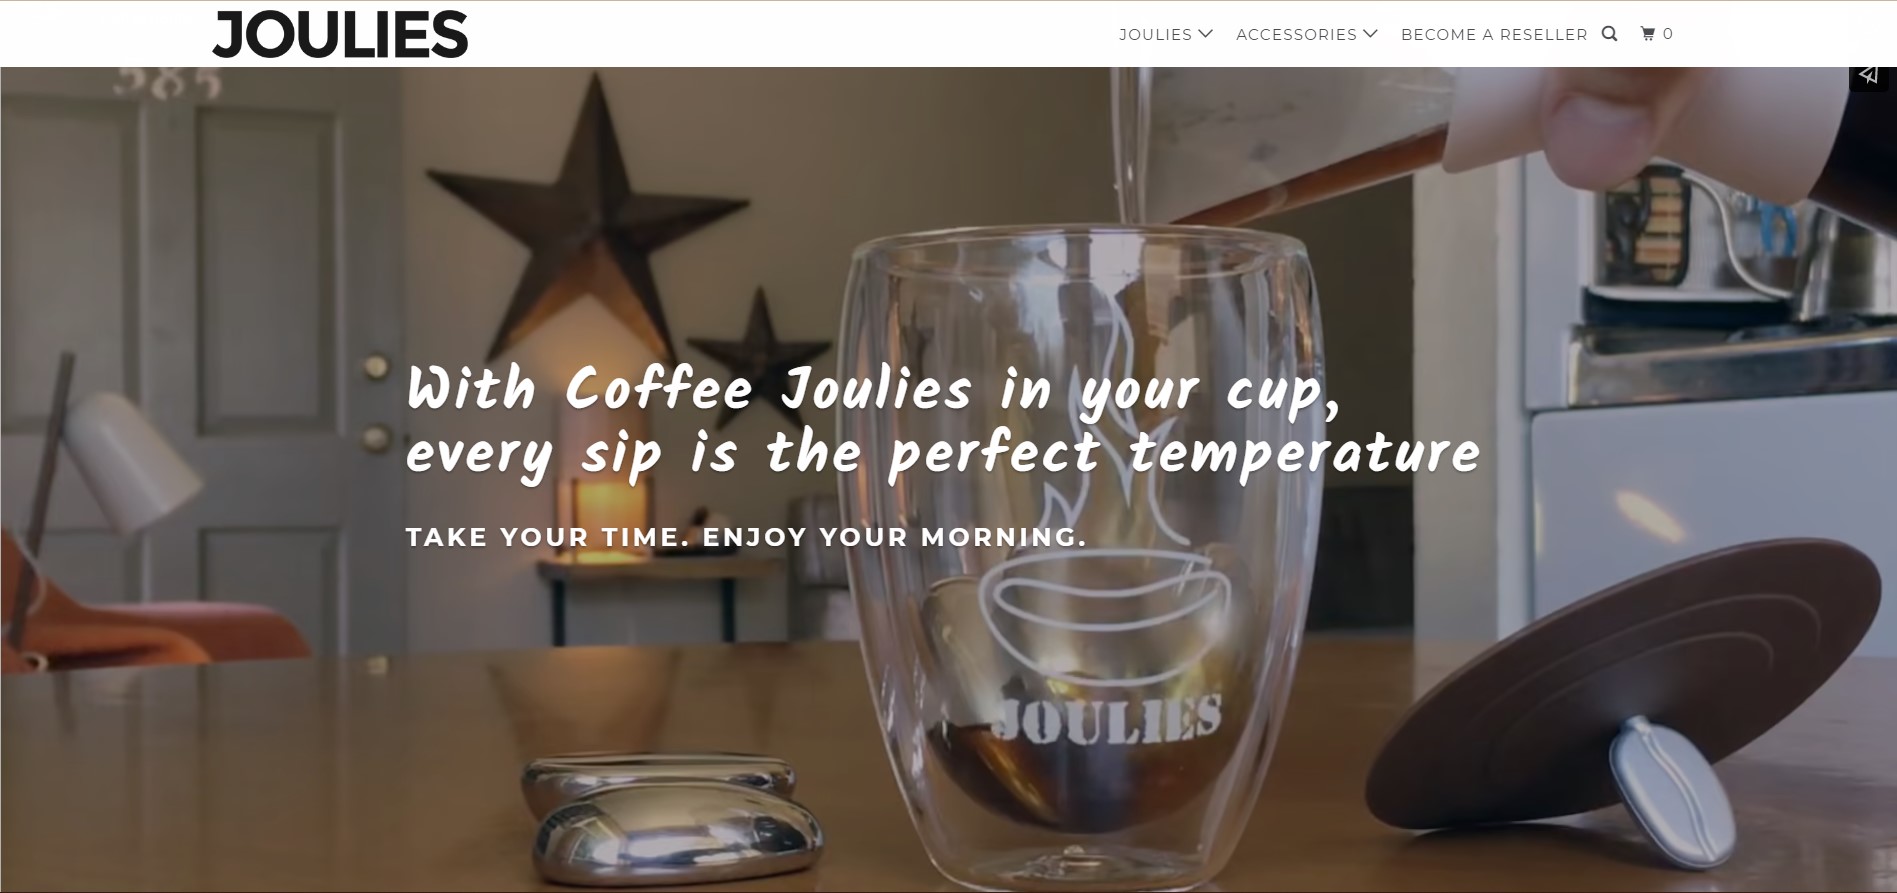 Shopify general store name ideas: Coffee Joulies